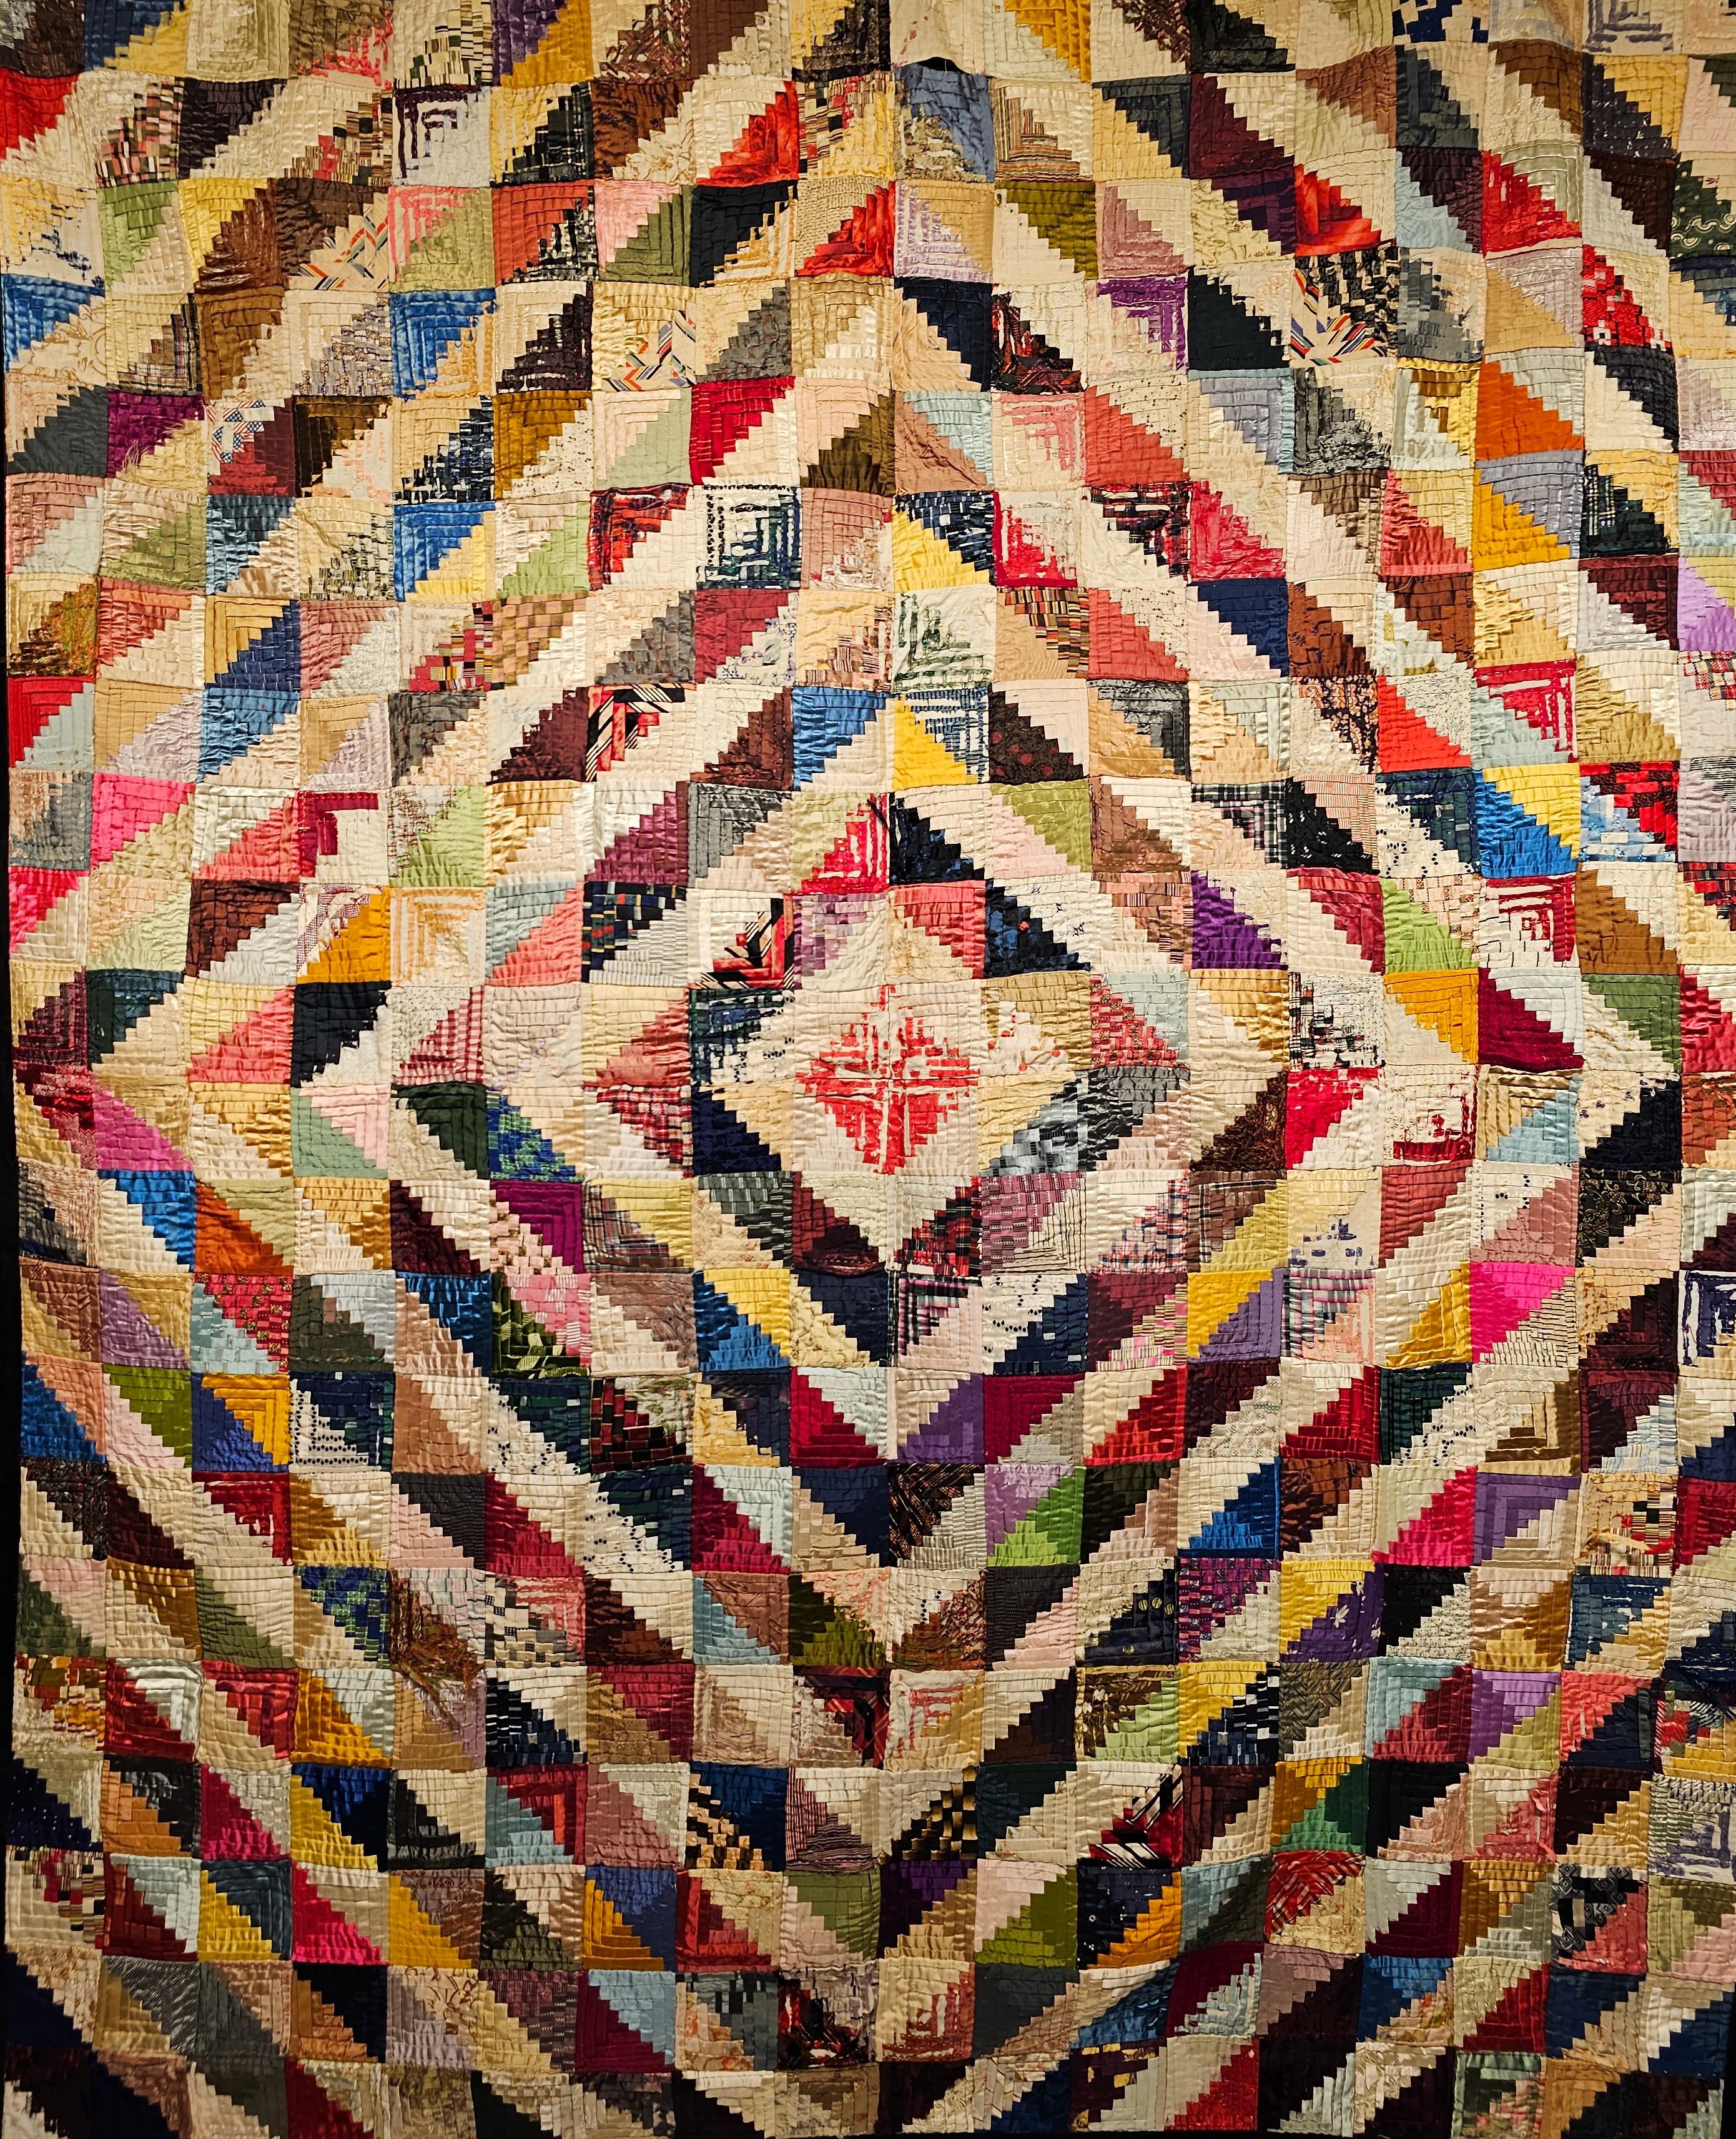 Beautiful American Silk Quilt was hand stitched in the late 1800s in the New England area of North East, United States. The design in this American Silk Quilt is known as the 